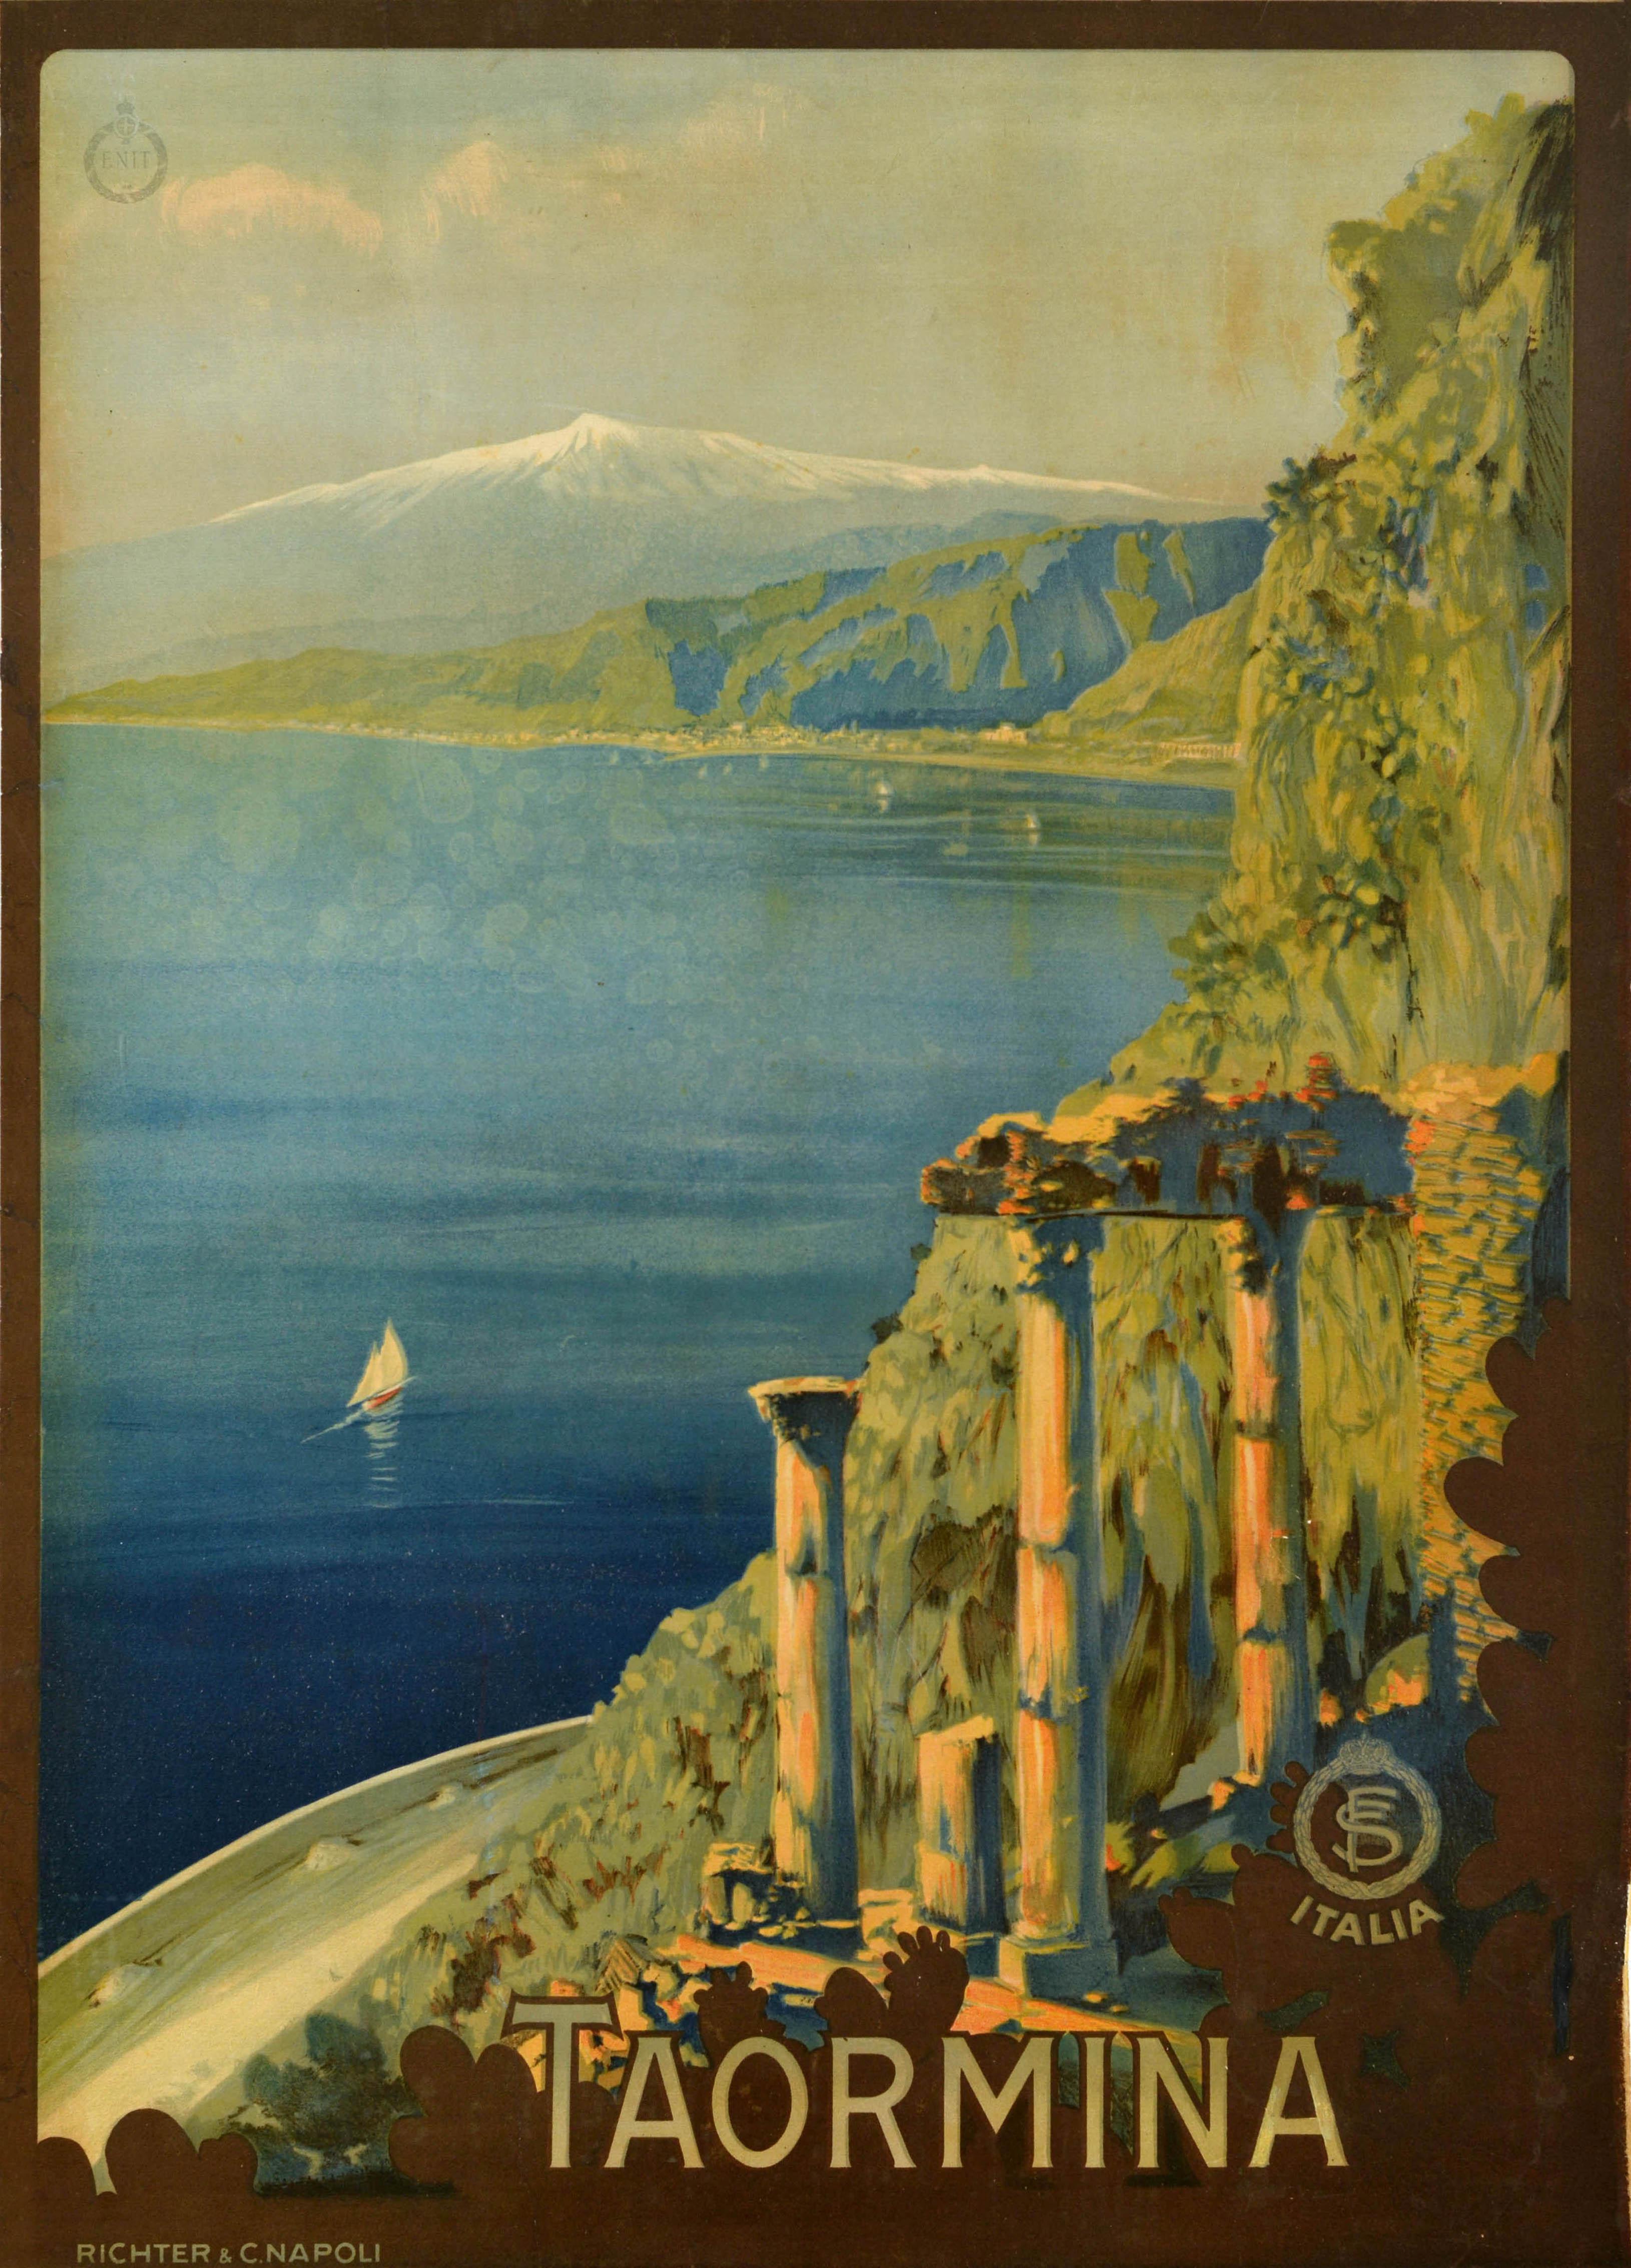 Original vintage travel poster Taormina Italia featuring stunning artwork of the hilltop town in Sicily with a view over the ancient ruins and sailing boats on the calm blue sea leading around the coast to a snow topped Mount Etna in the distance,